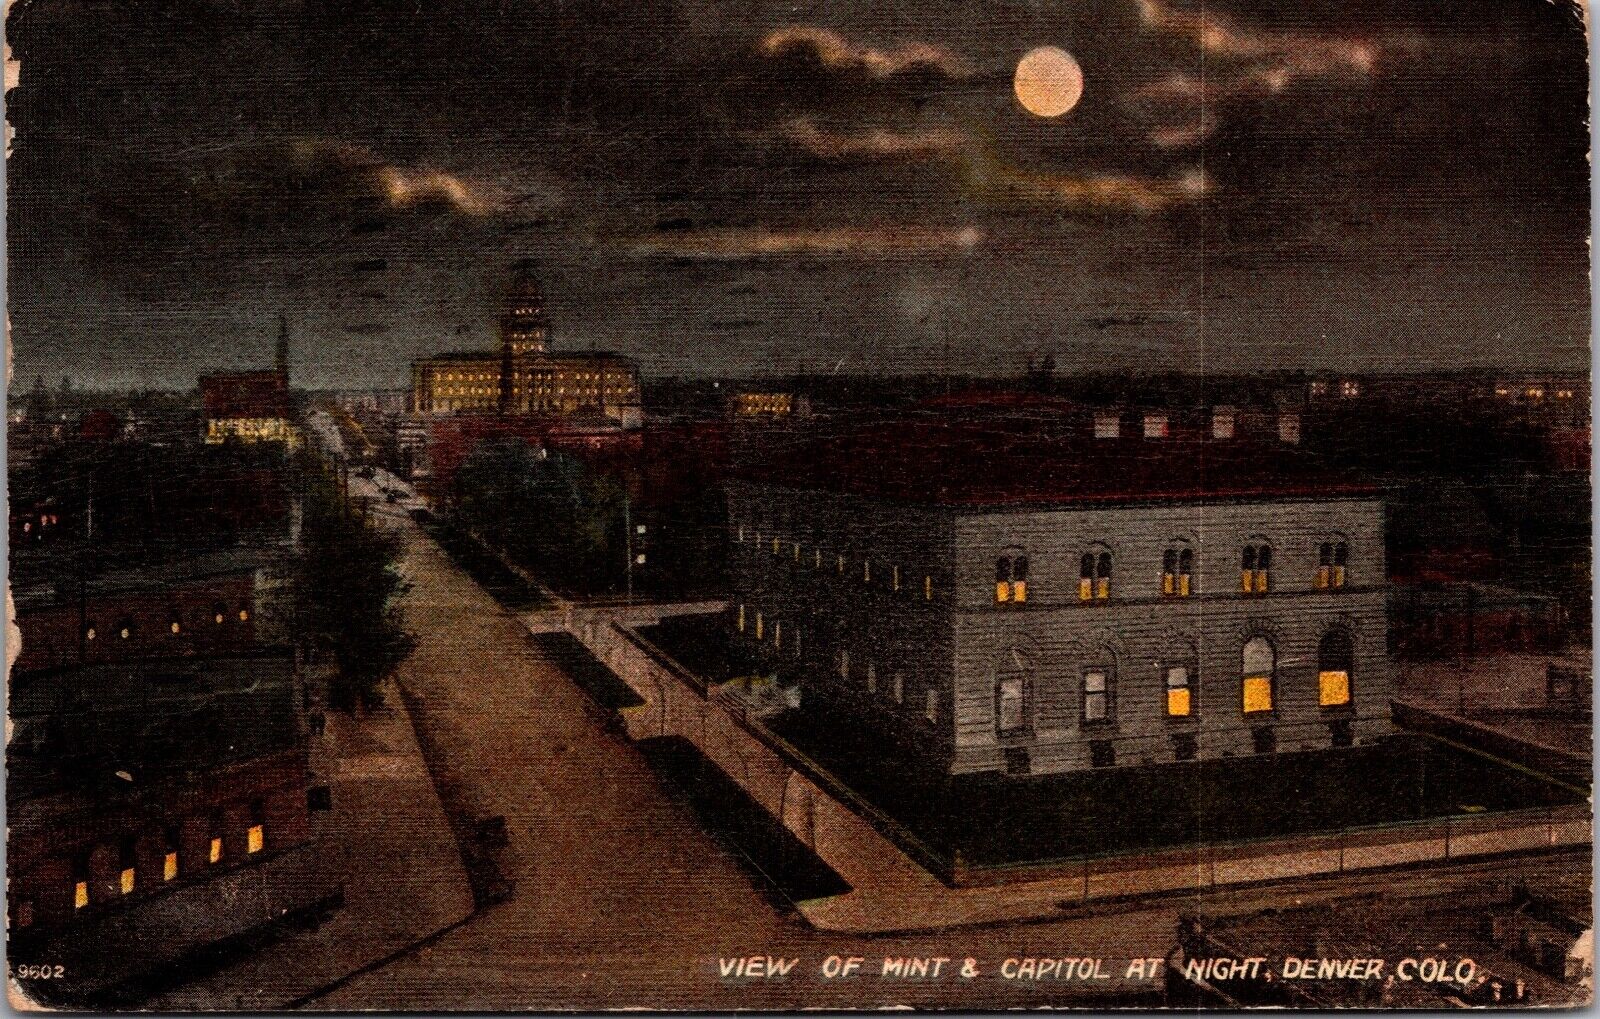 Postcard View of Mint and Capitol at Night in Denver, Colorado